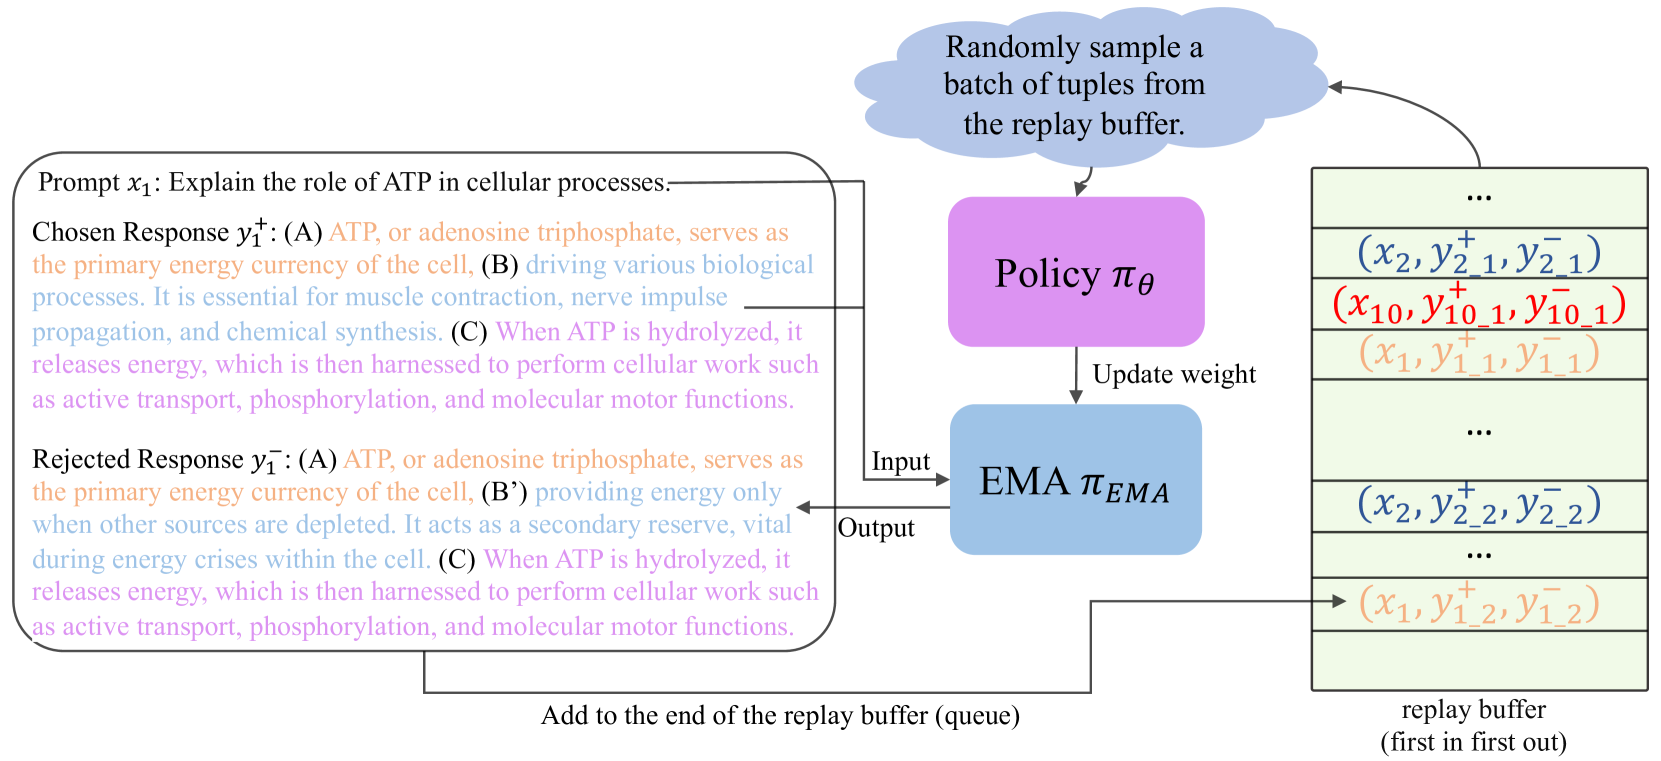 Self-Augmented Preference Optimization: Off-Policy Paradigms for Language Model Alignment